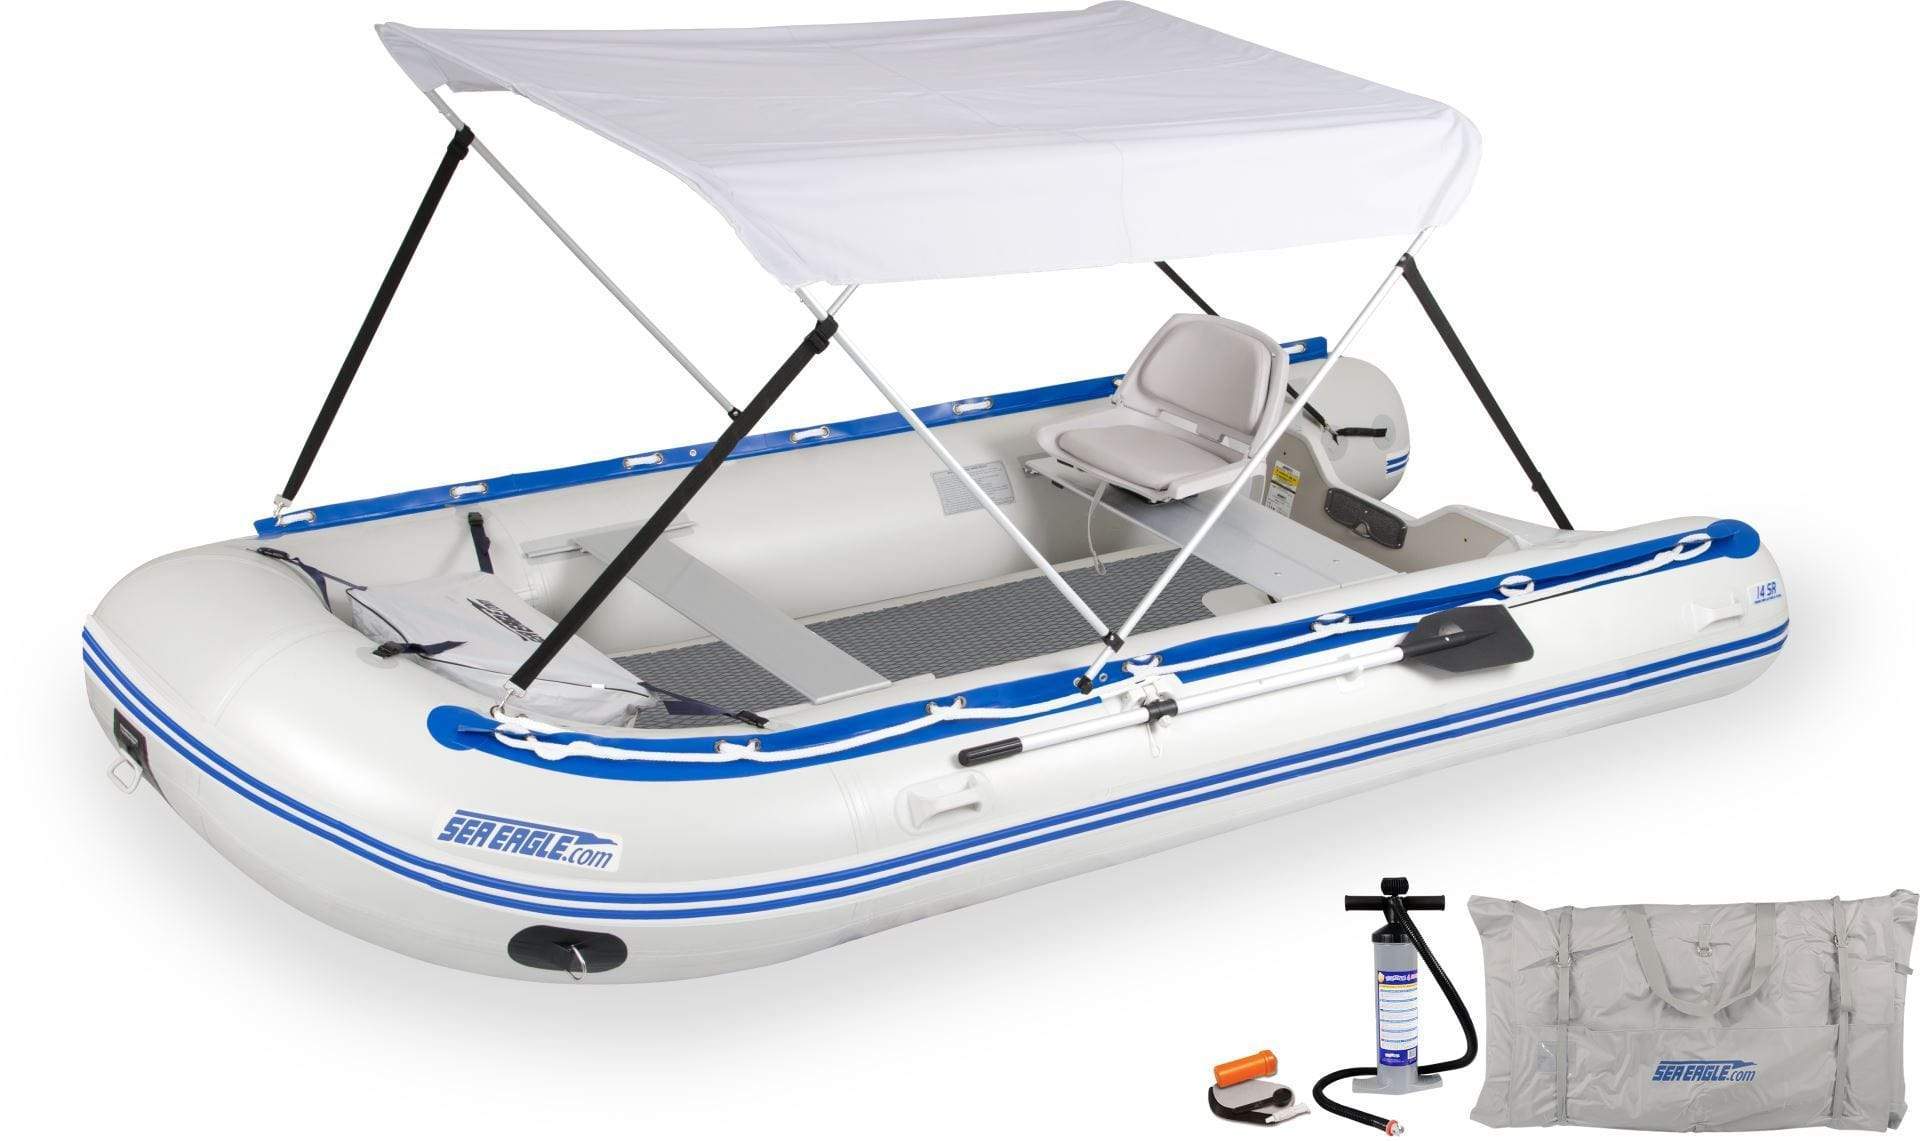 SeaEagle Transom Boat Packages Swivel Seat and Canopy / Dropstitch Sea Eagle - 14SRK 7 Person 14' White/Blue Sport Runabout Inflatable Boat Swivel Seat Canopy Package ( 14SRK_SWC )